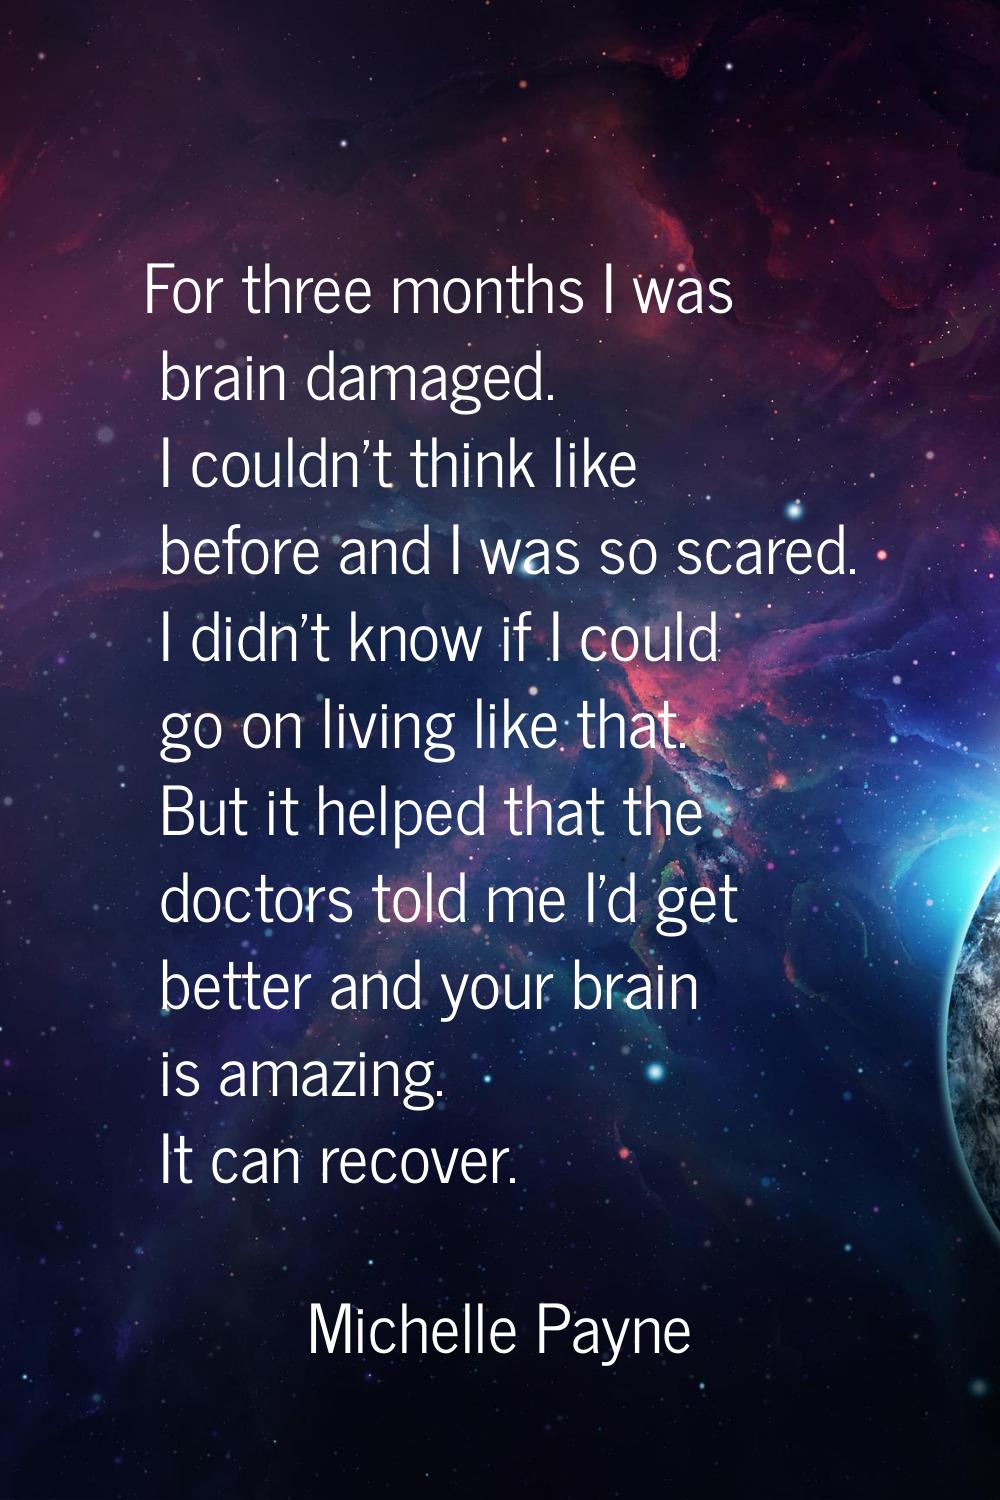 For three months I was brain damaged. I couldn't think like before and I was so scared. I didn't kn